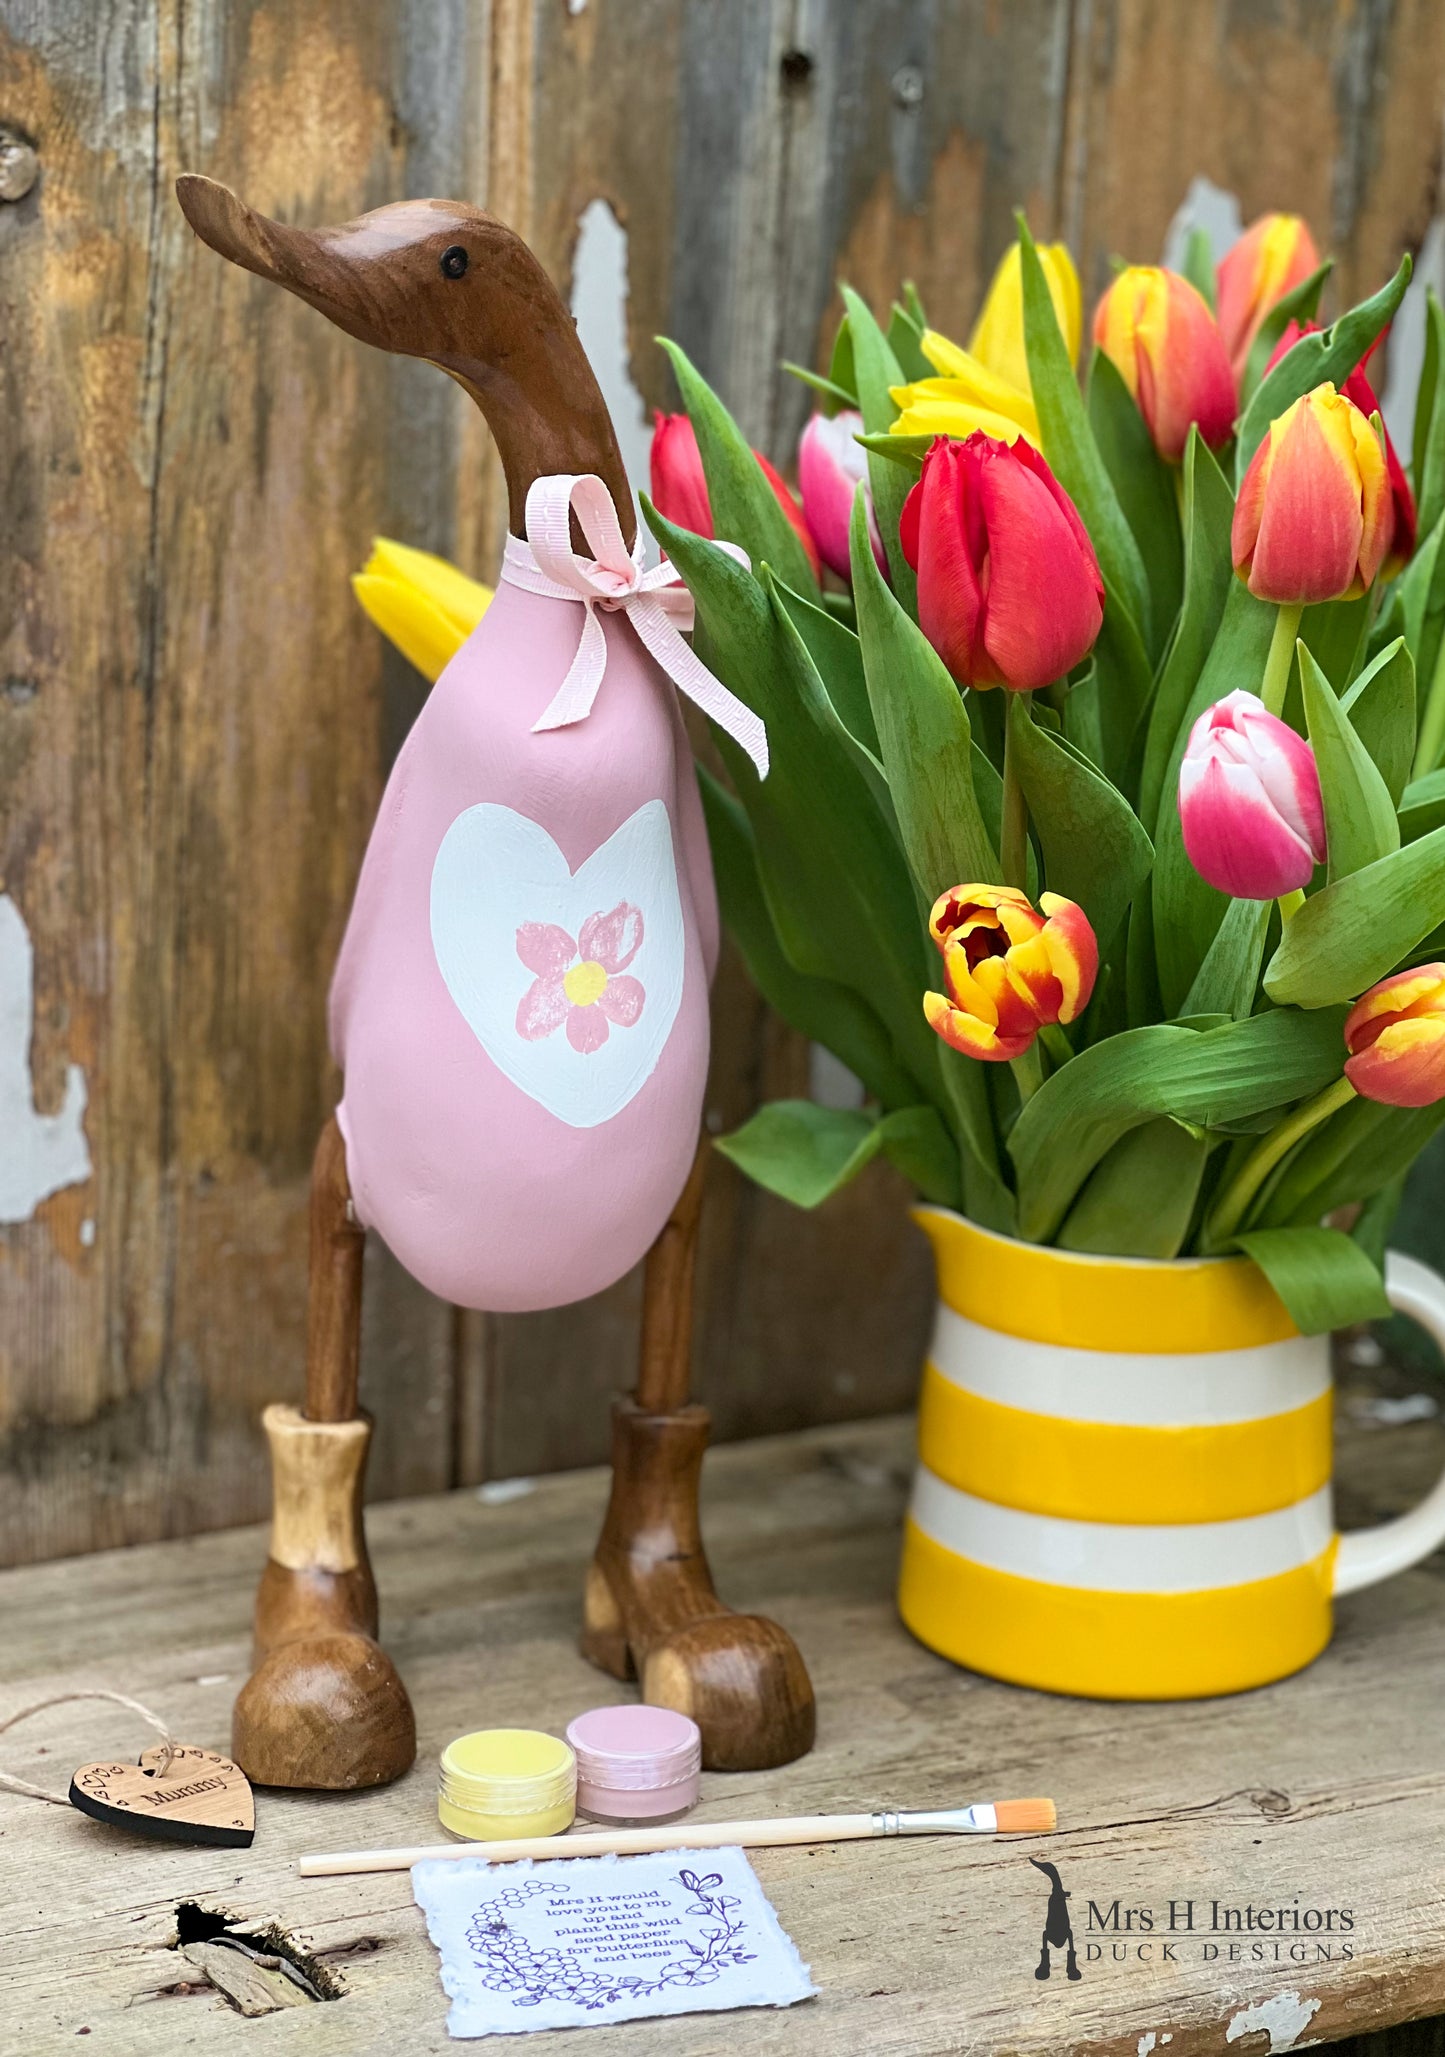 Muma The Bespoke Fingerprint Duck - Decorated Wooden Duck in Boots by Mrs H the Duck Lady